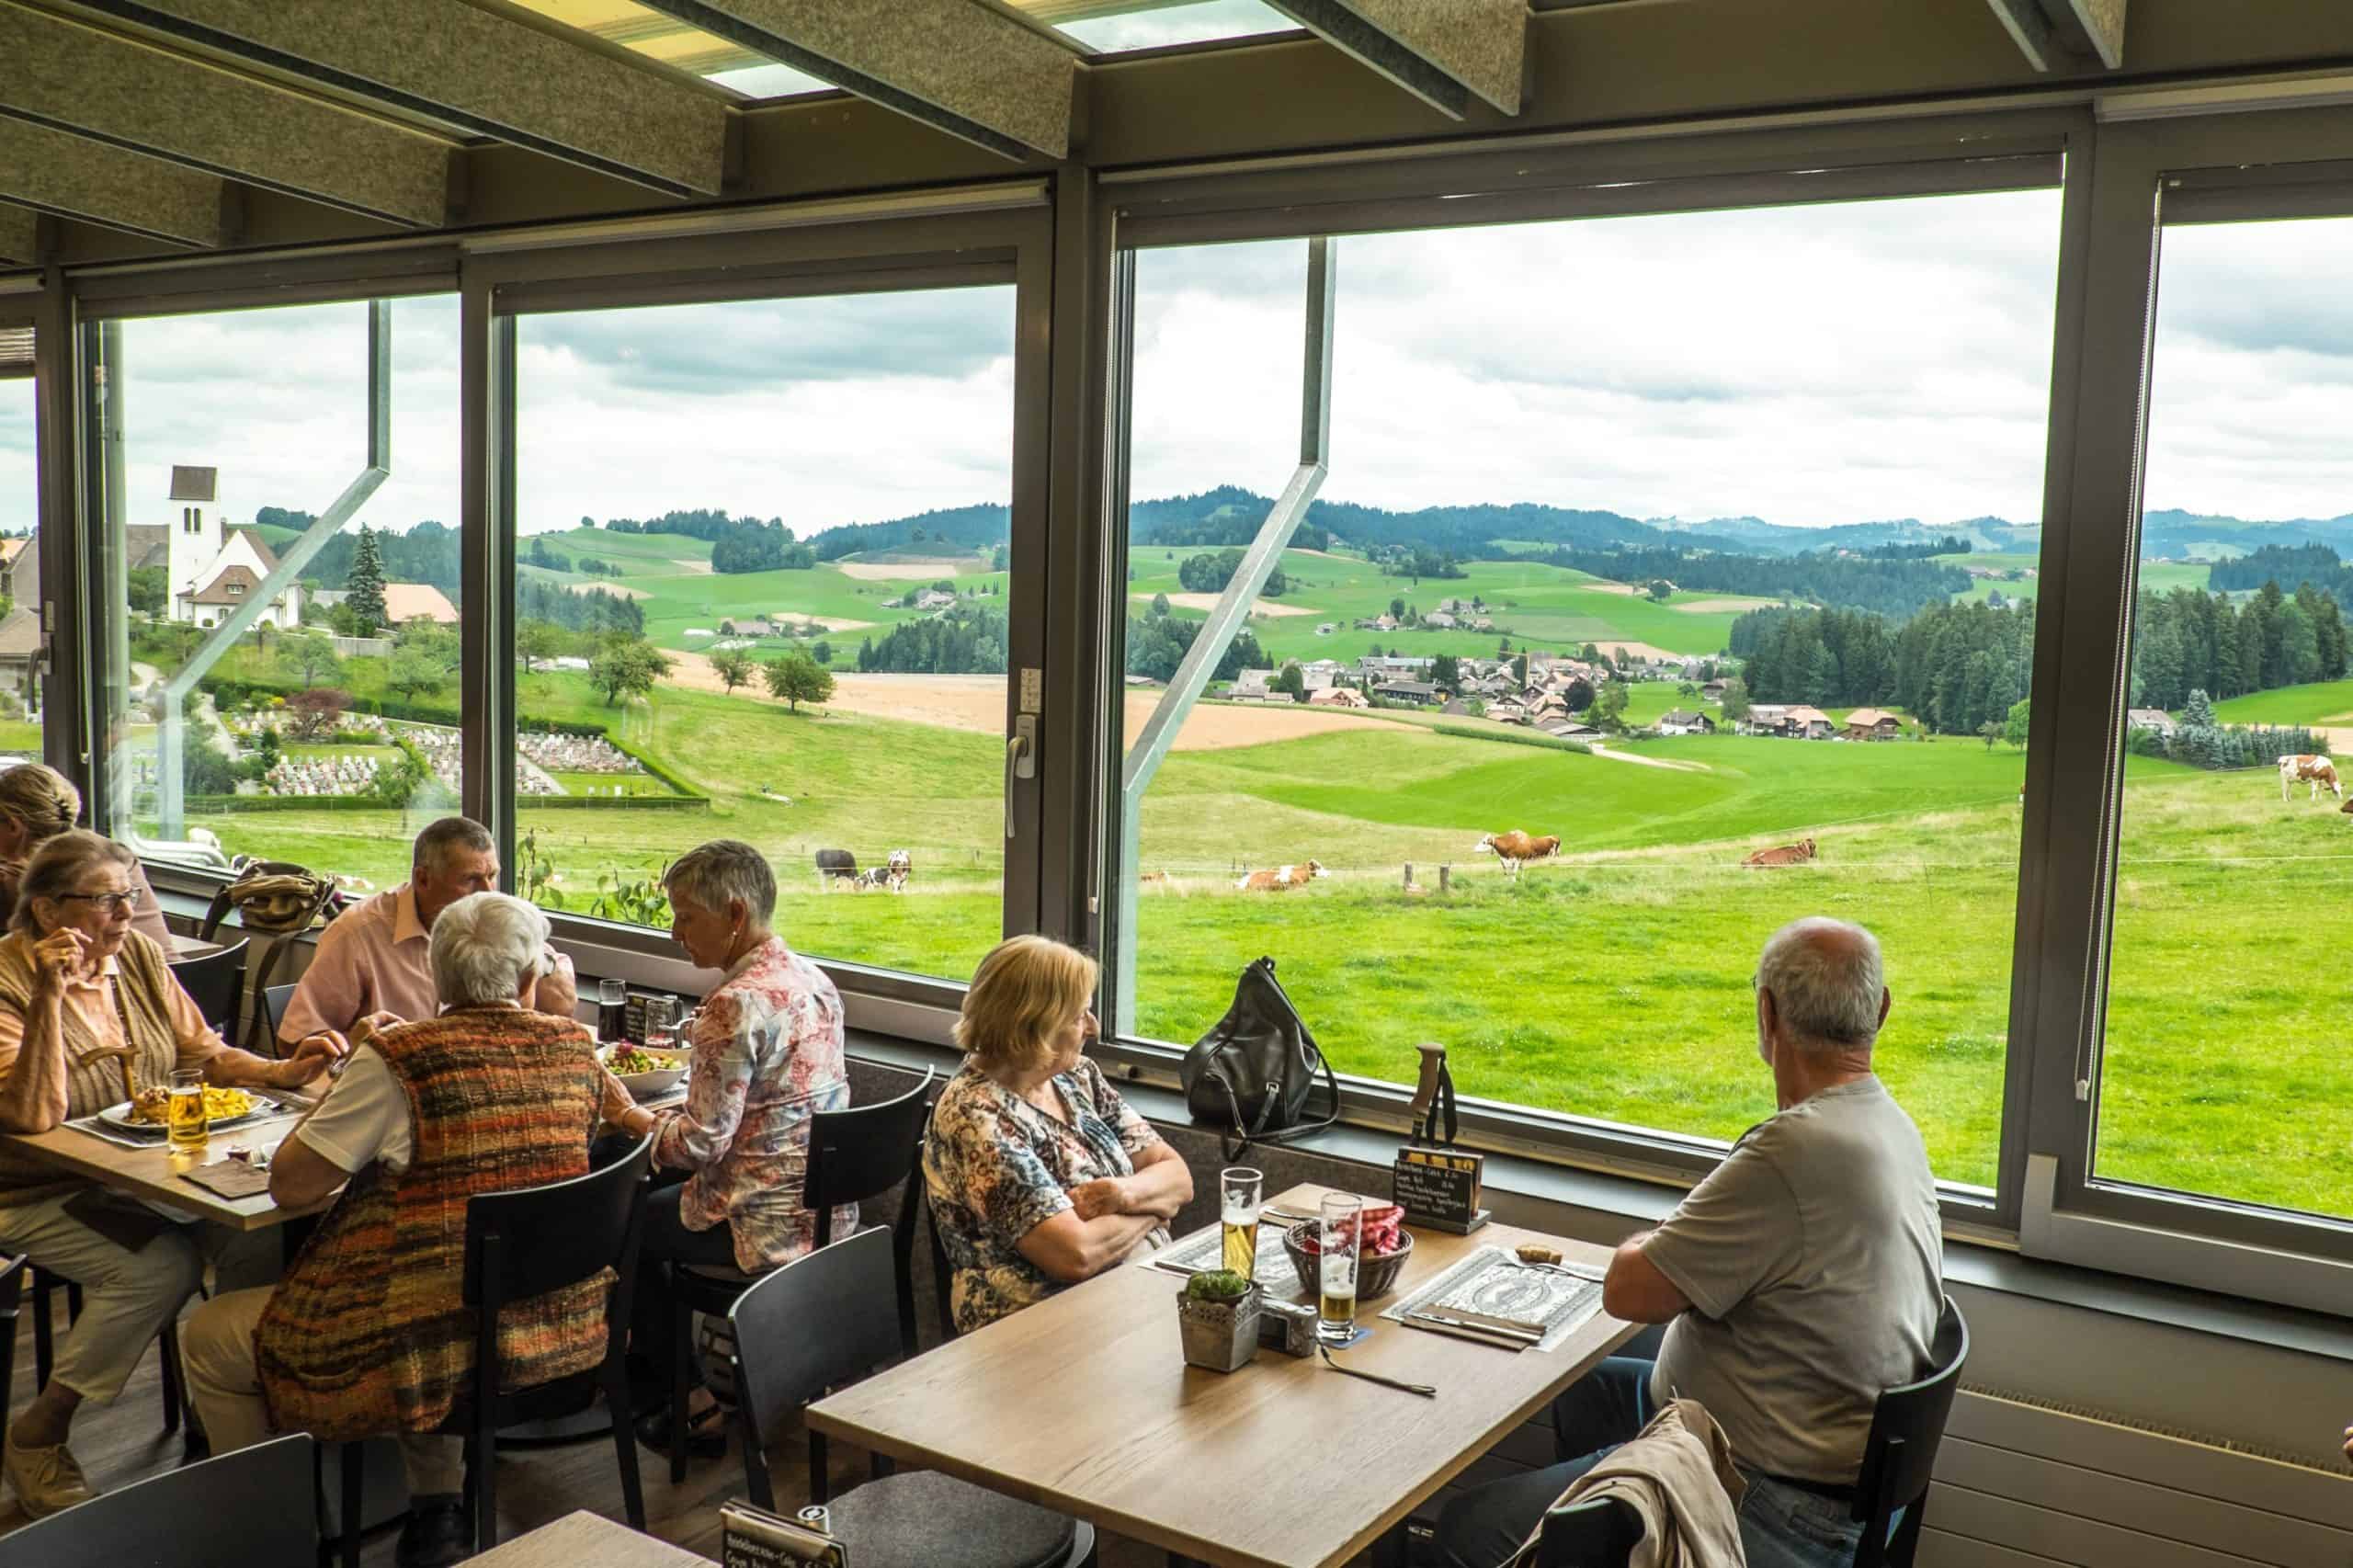 A group of people enjoyung Lunch at Emmentaler Showdairy in Emmental Valley, Switzerland